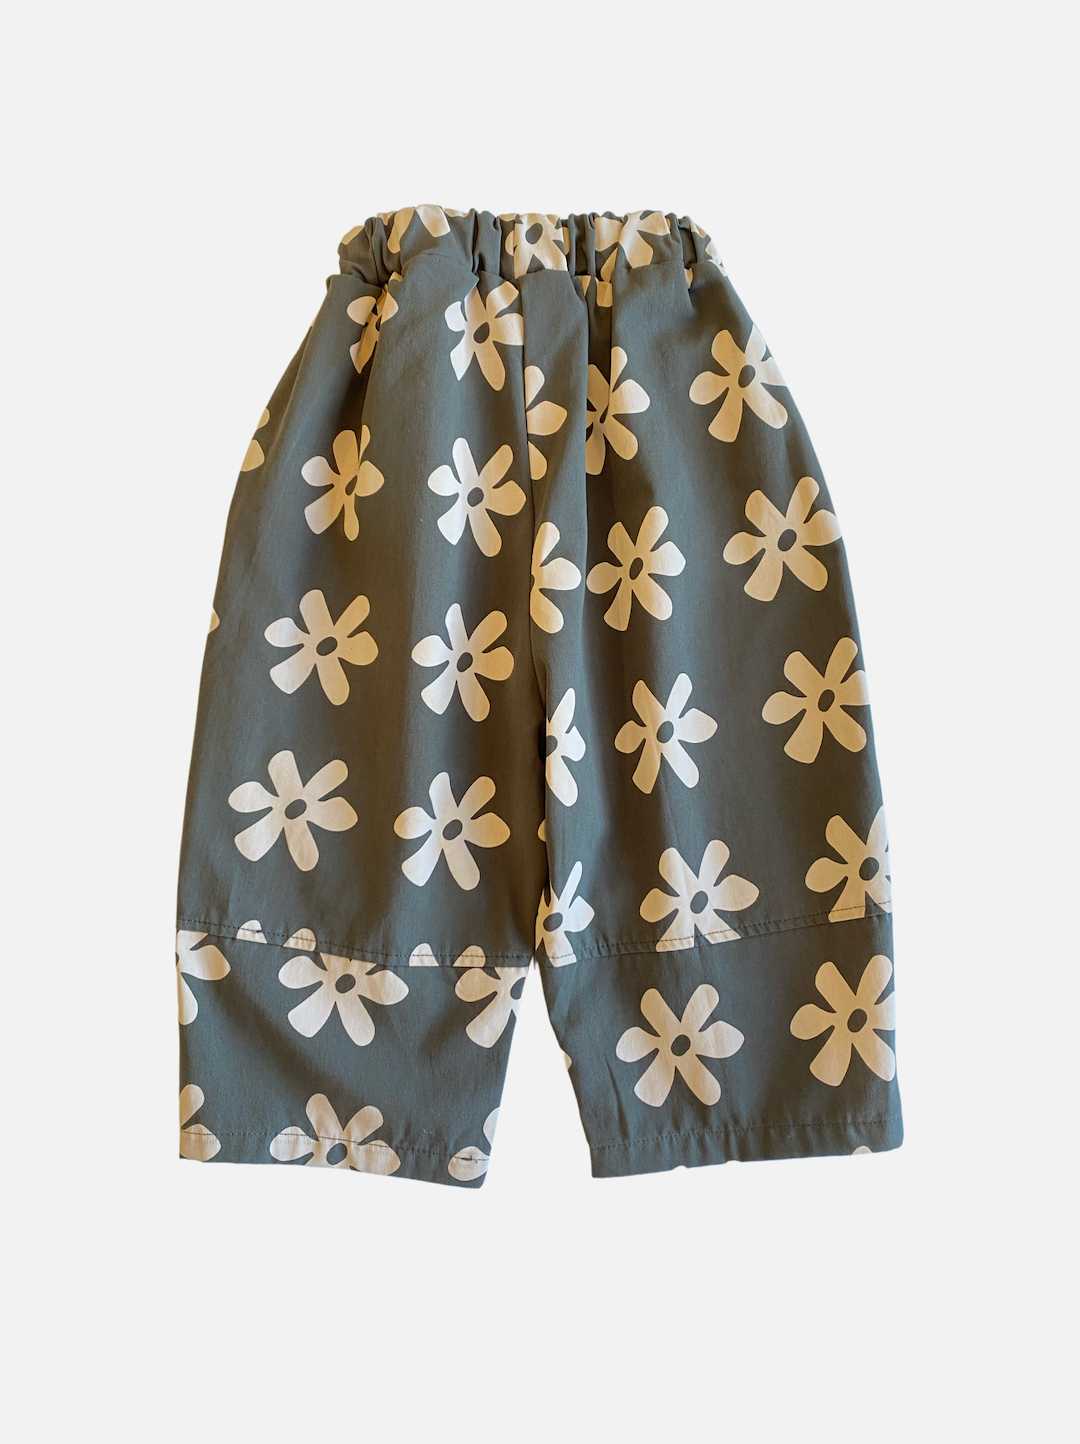 Black | A pair of kids' pants in gray with cream flowers, back view